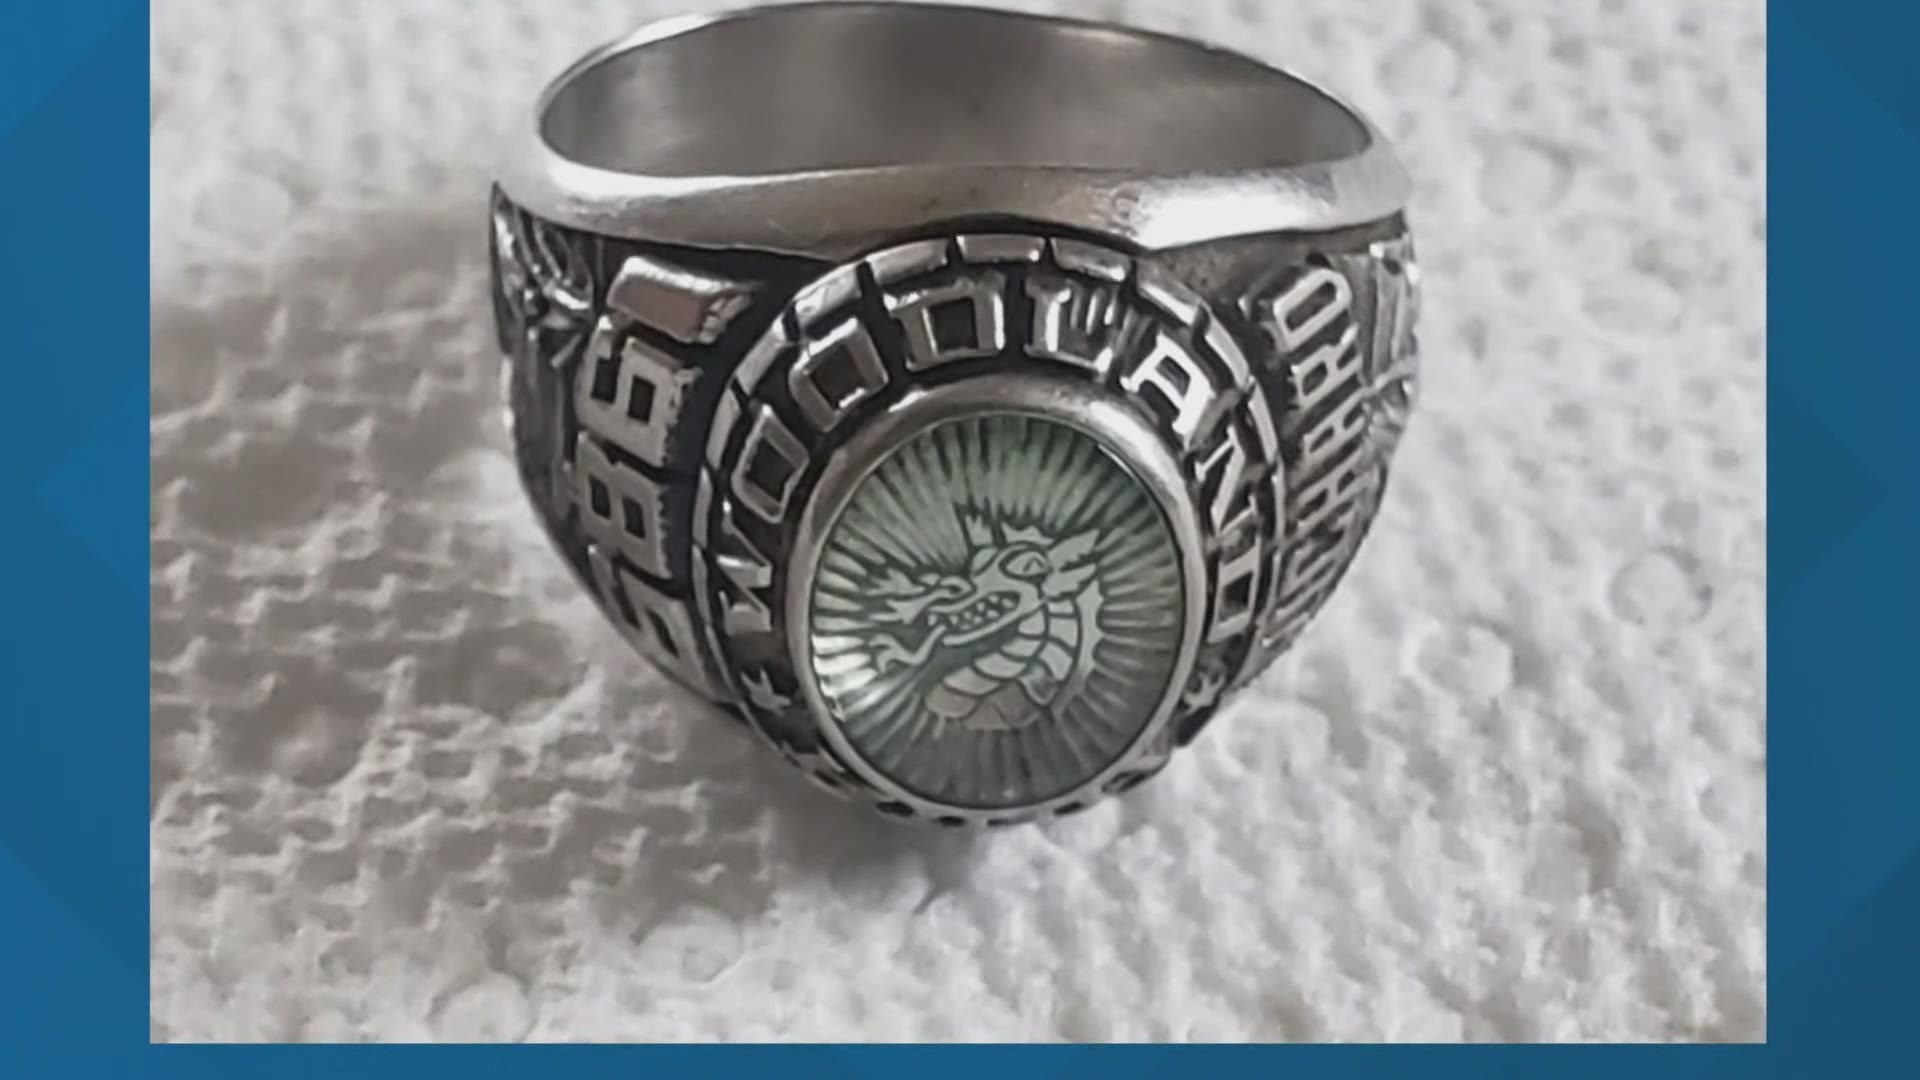 Richard Skinner was notified by alumni in the community that a class ring bearing his name had popped up on Ebay, and was able to get it back after 32 years.